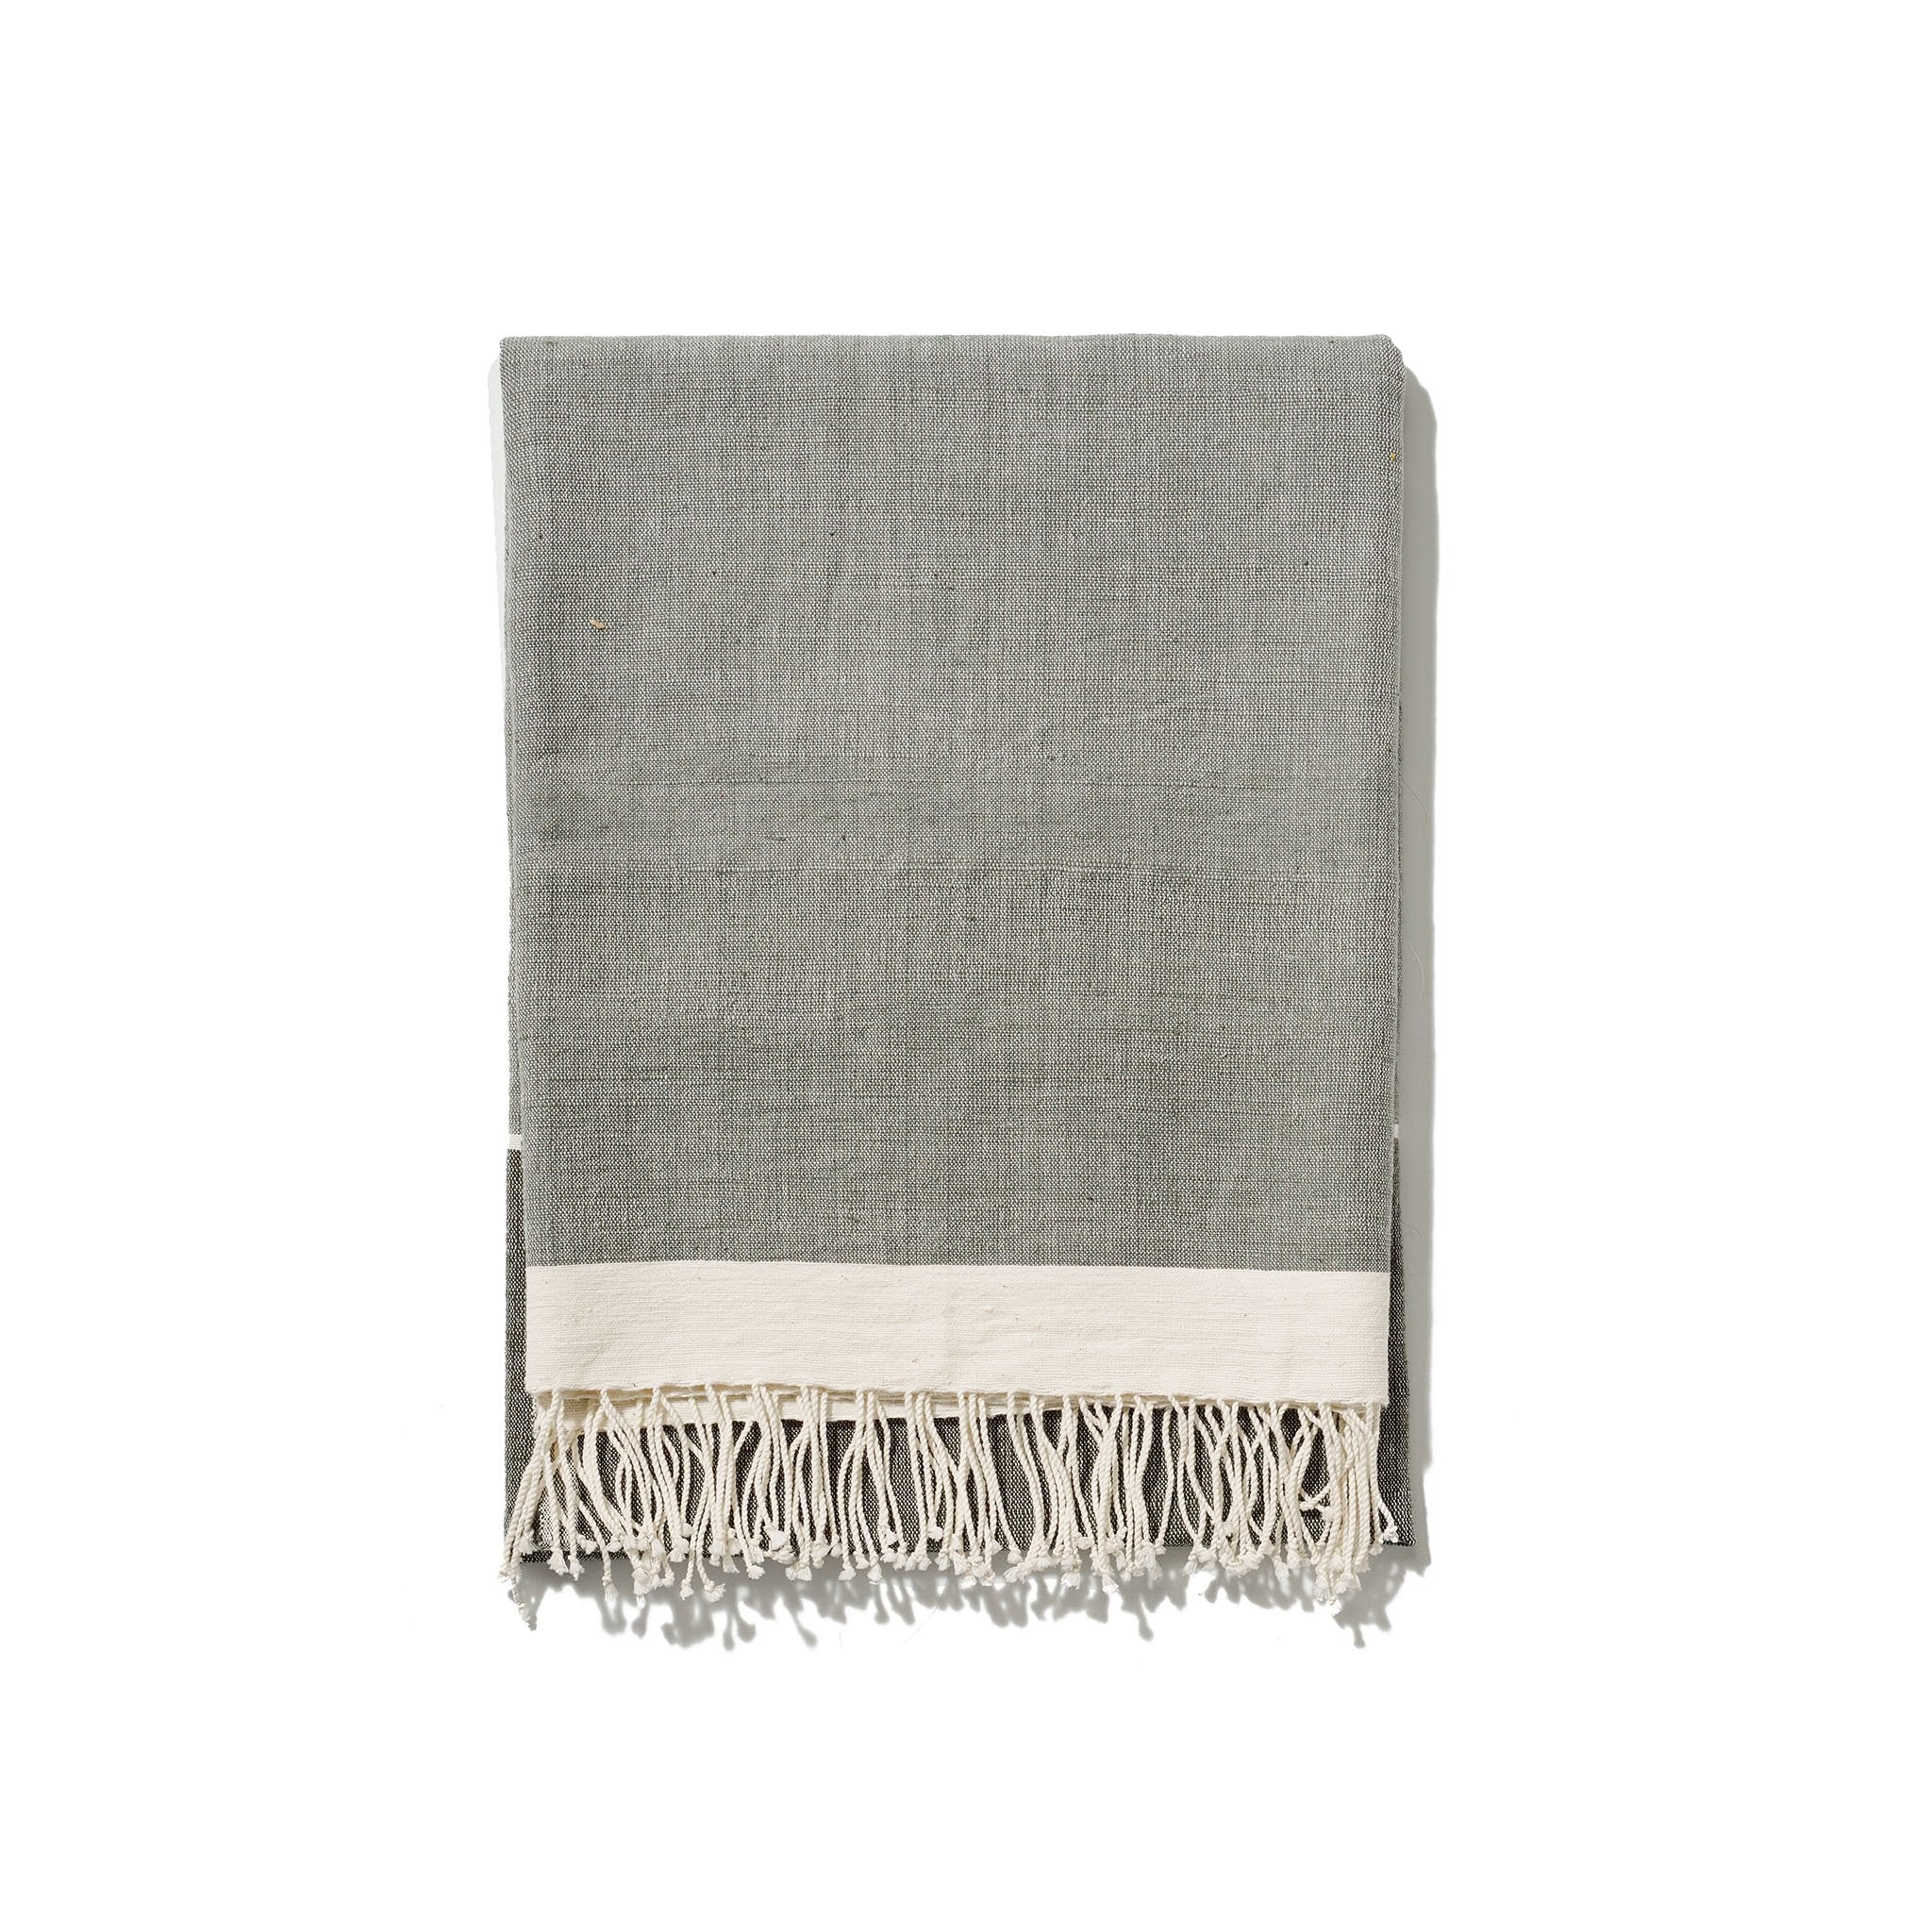 A traditional and timeless grey towel woven by hand from 100% Ethiopian cotton, dyed in small batches, and fringed by hand.